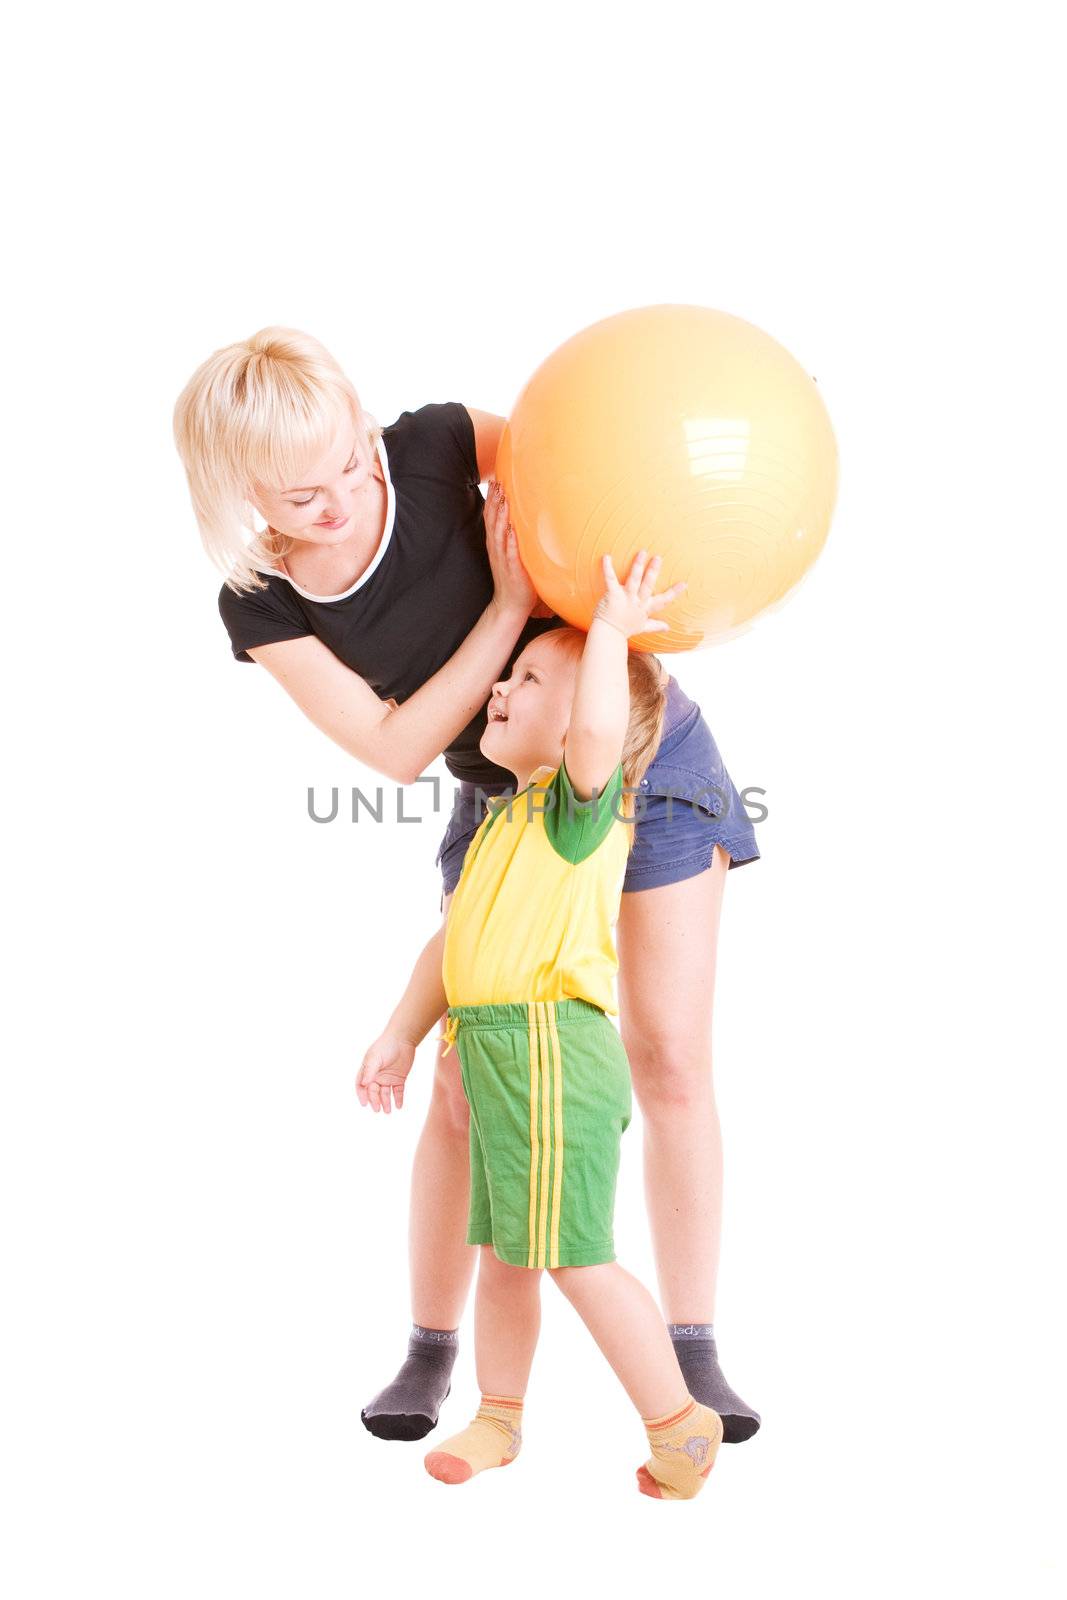 mother and her son looking one to another with a fitness ball in their hands